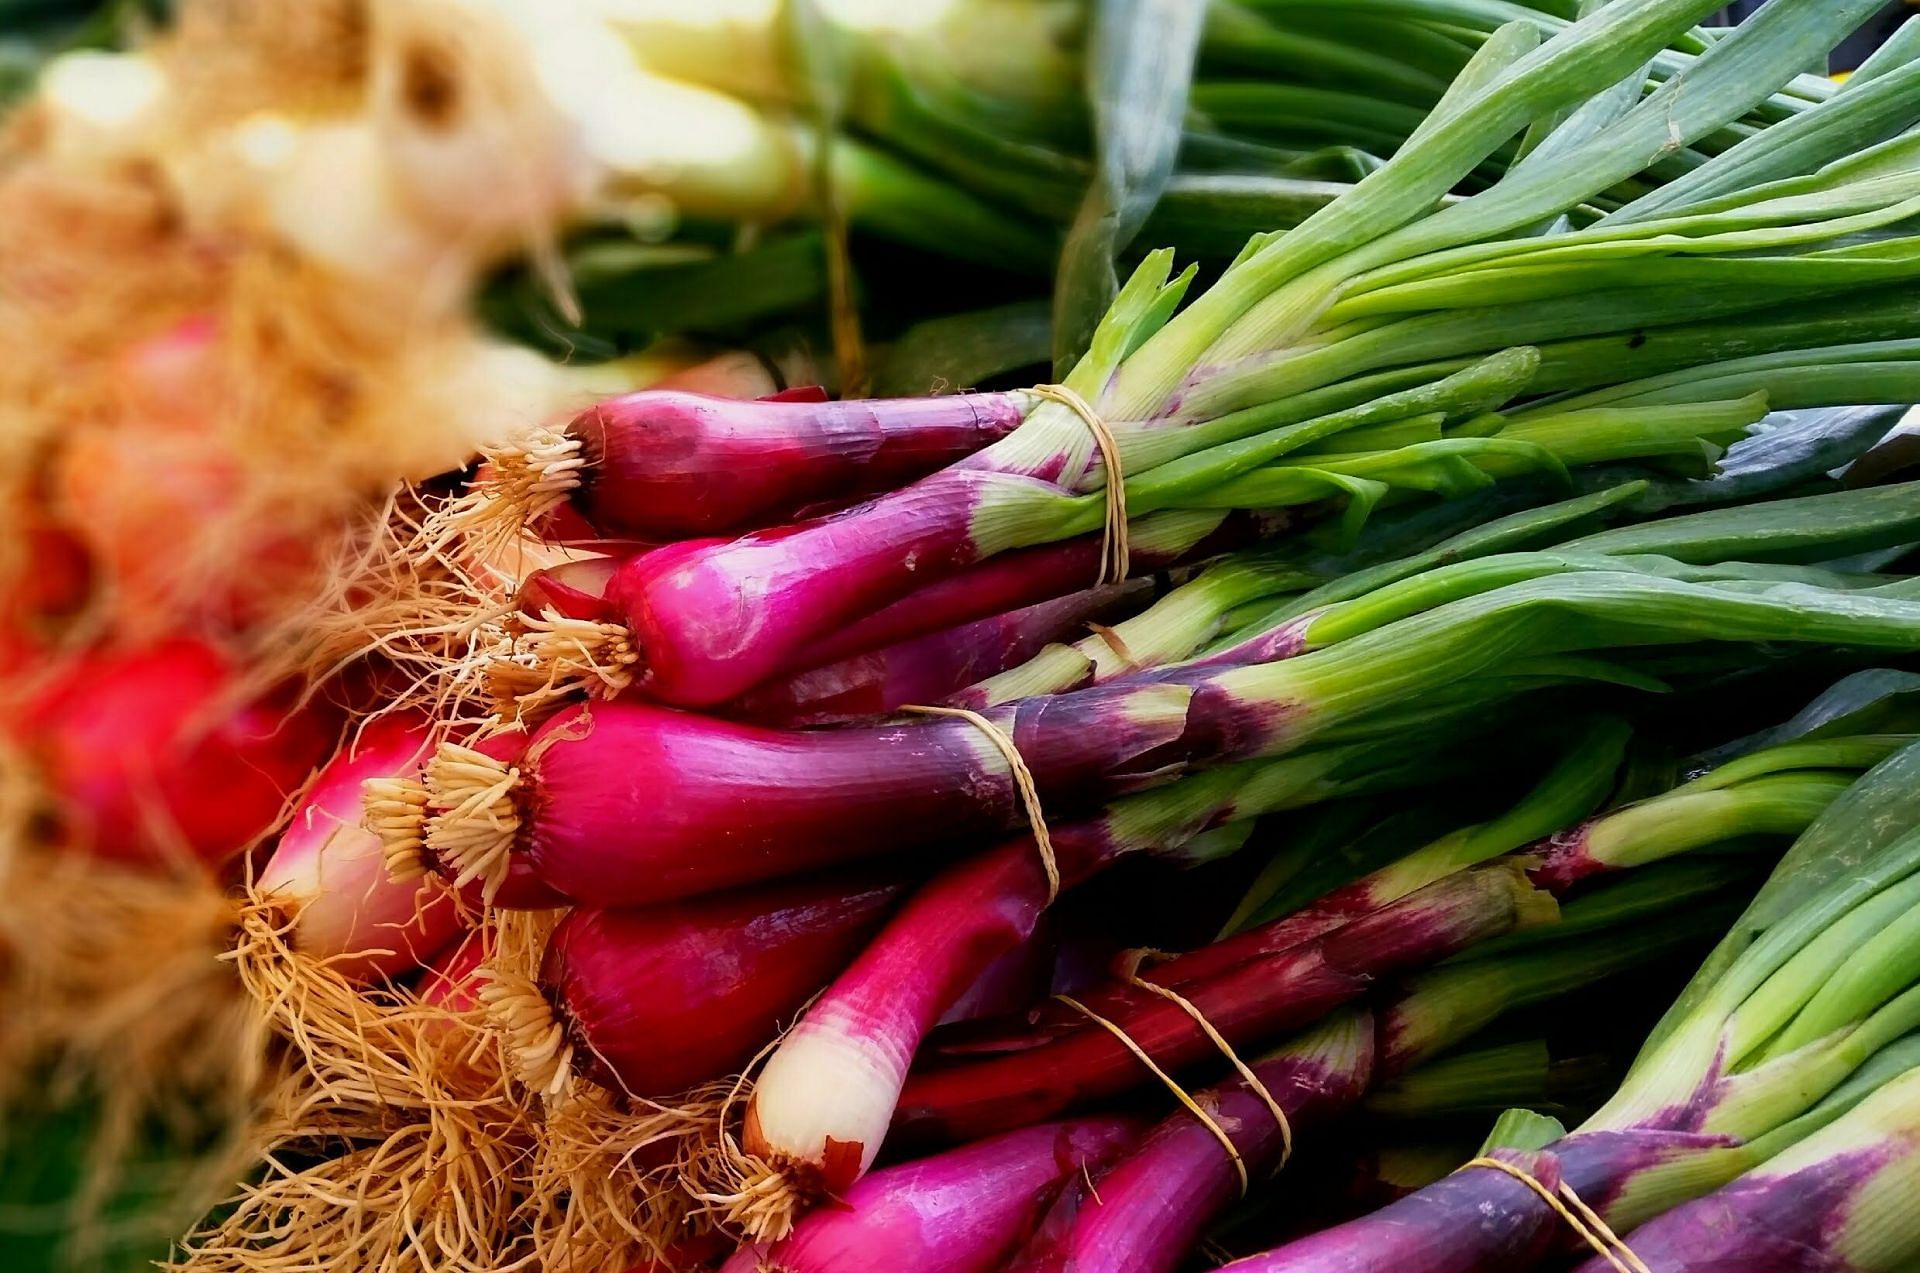 Including scallions in your diet can help improve your gut health. (Image via Pexels / Scott Horton)